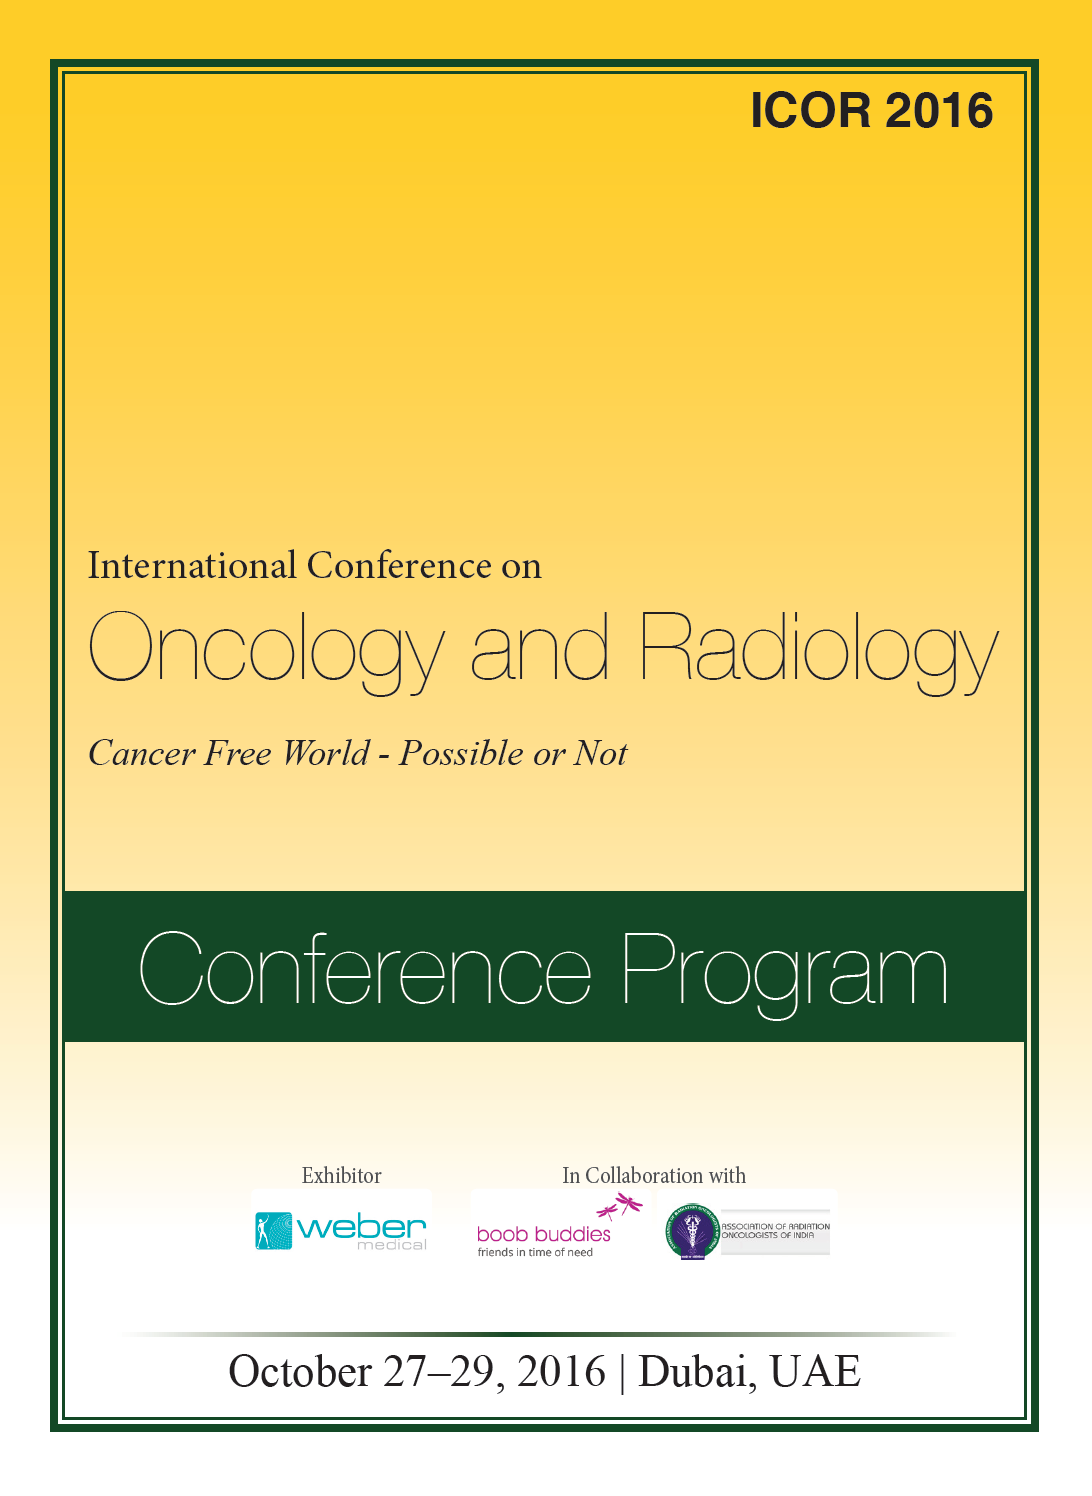 International Conference on Oncology and Radiology  Program